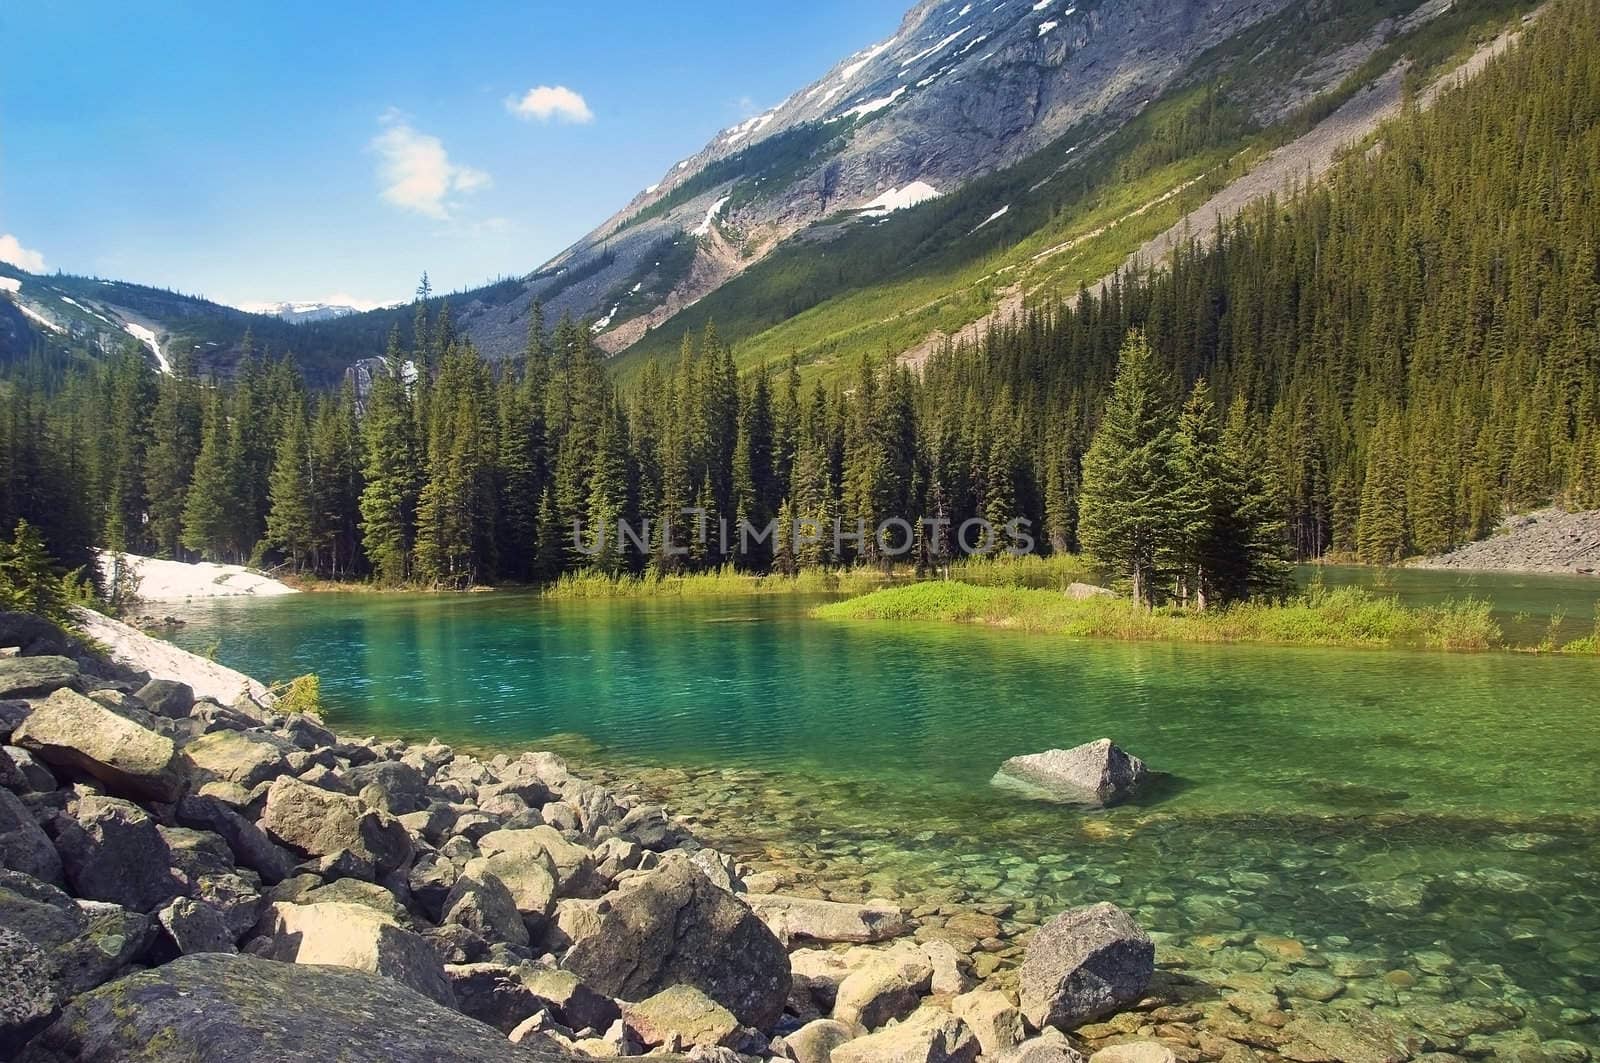 emerald lake at the foot of  the mountains in Sabwatcha canyon, Canada